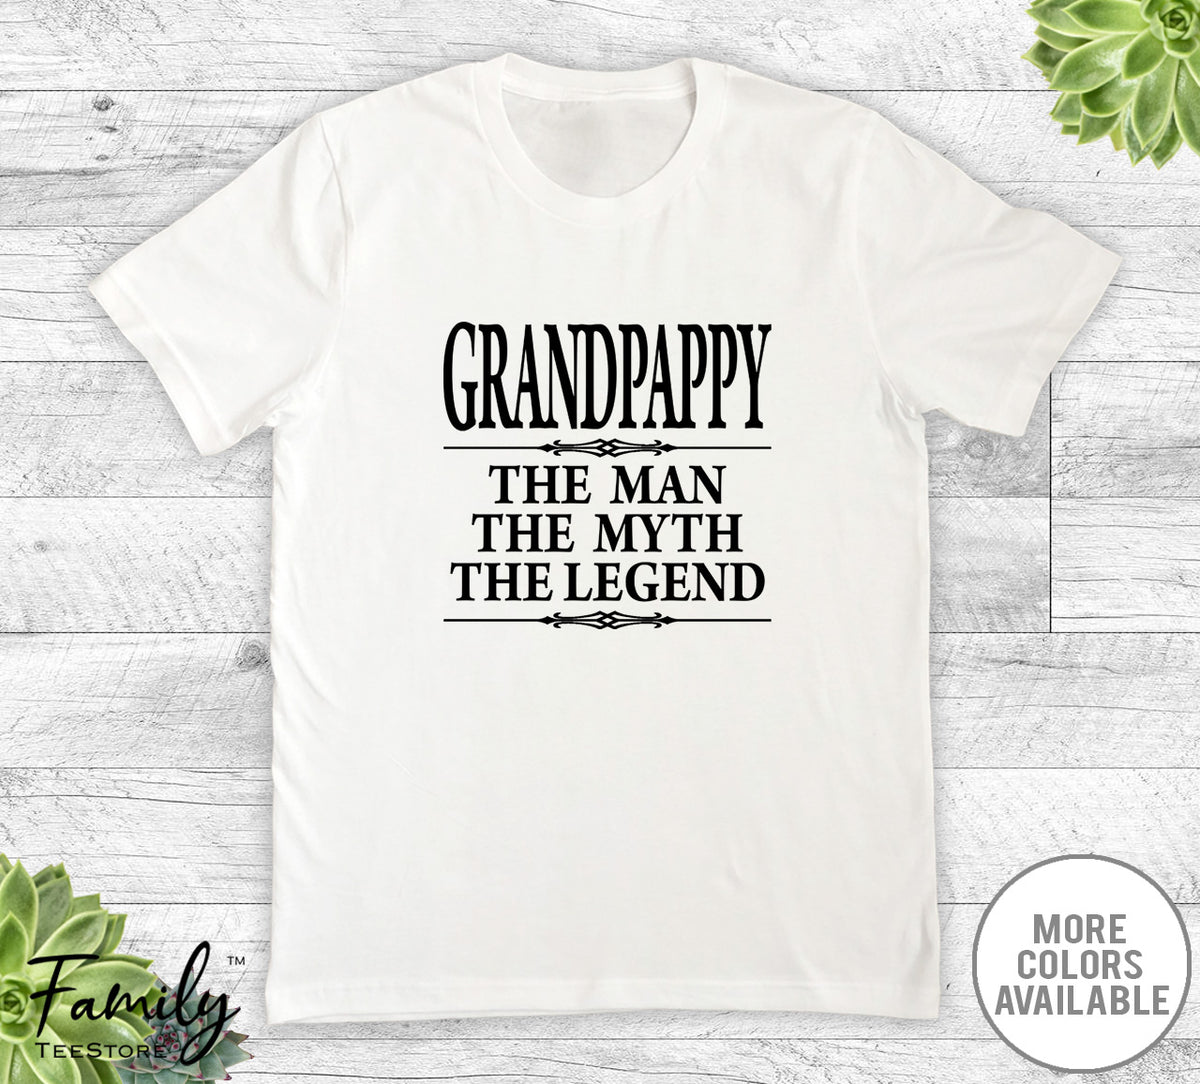 Grandpappy The Man The Myth The Legend - Unisex T-shirt - Granpappy Shirt - Granpappy Gift - familyteeprints